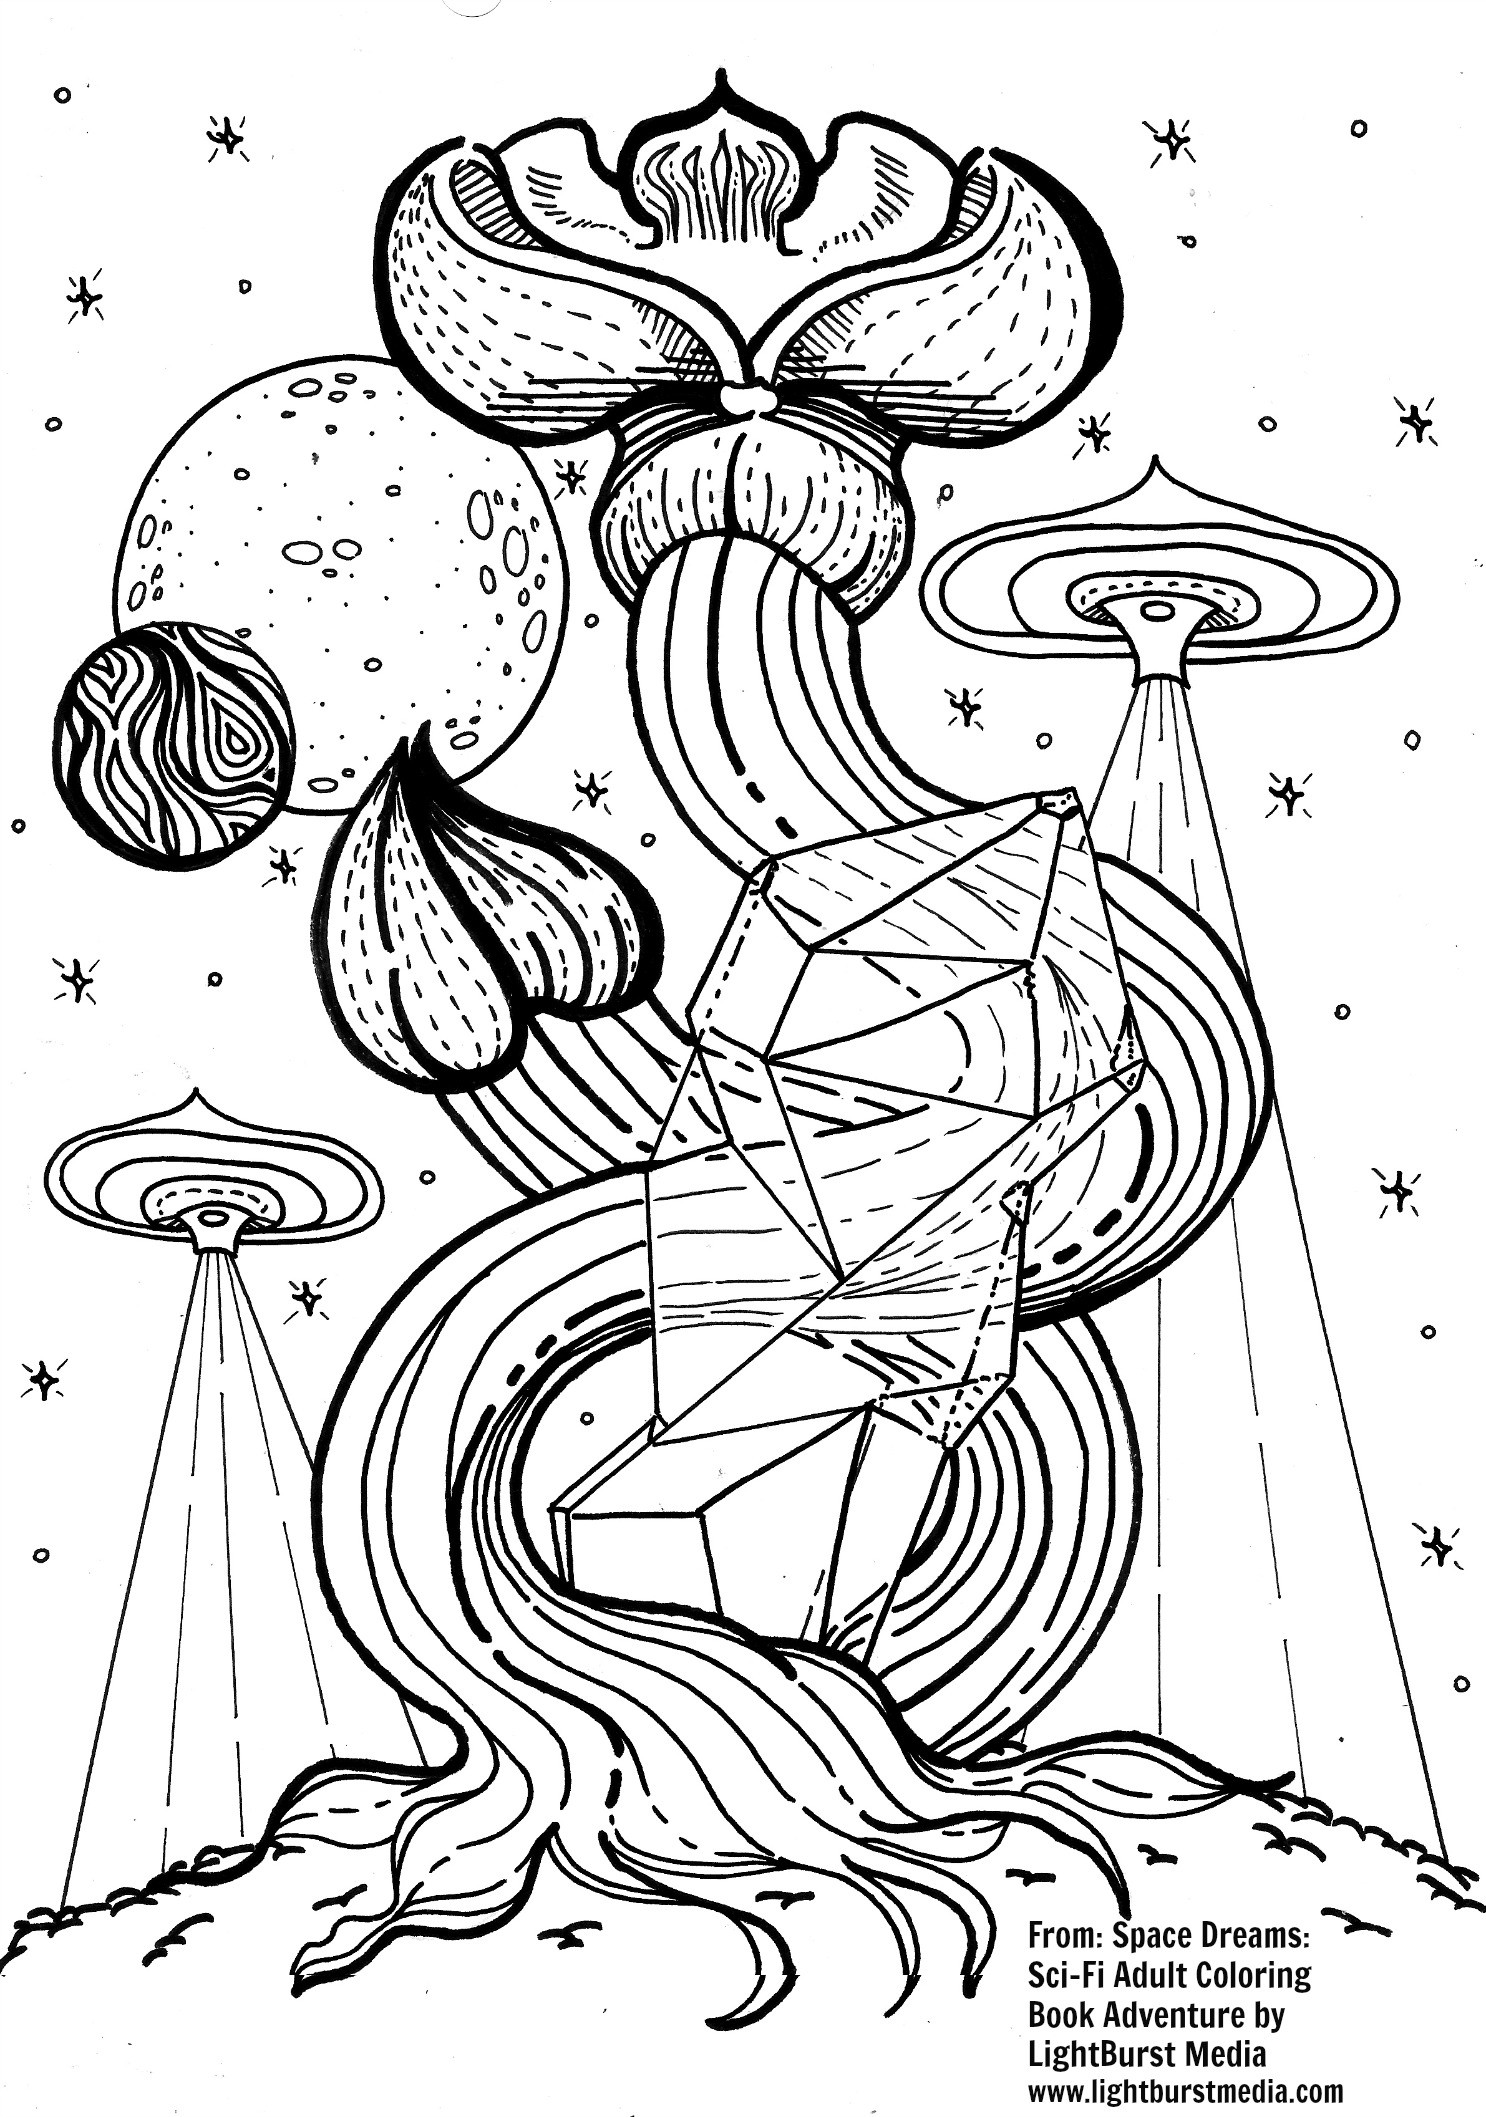 Coloring Pages For Adults Printable Free
 FREE Coloring Pages – Adult Coloring Worldwide